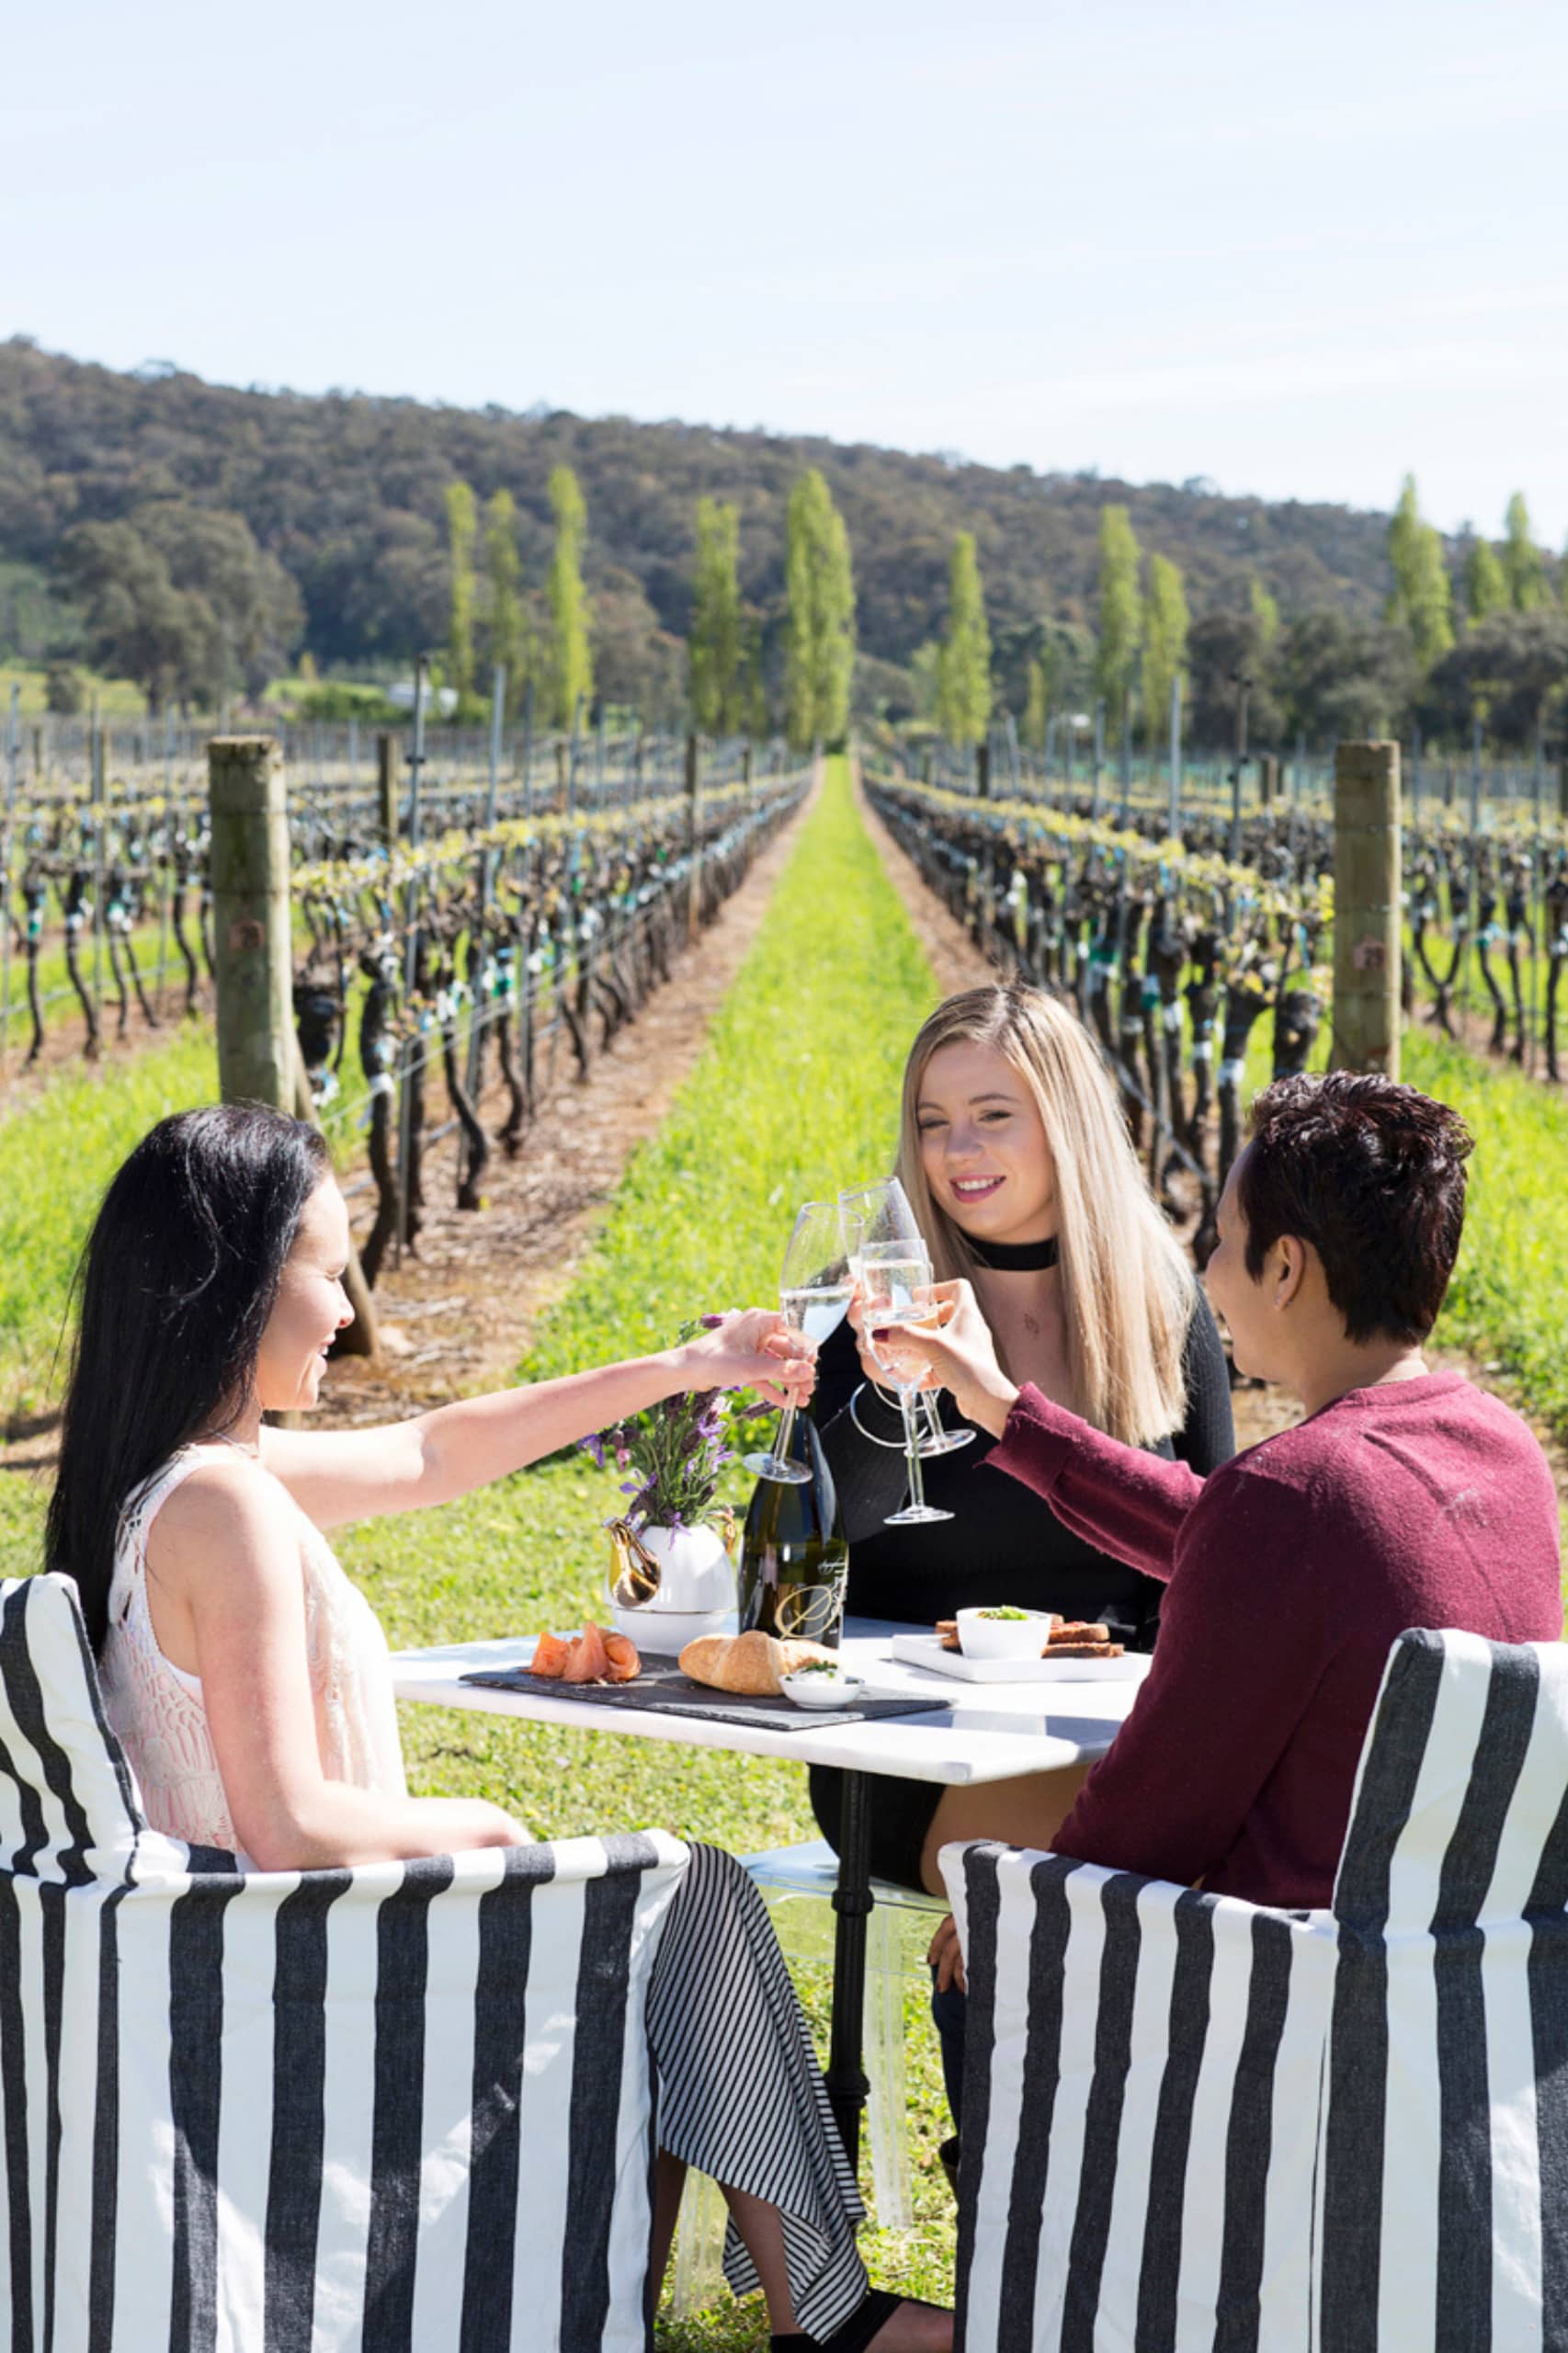 A group of women drinking wine in front of rows of grape vines